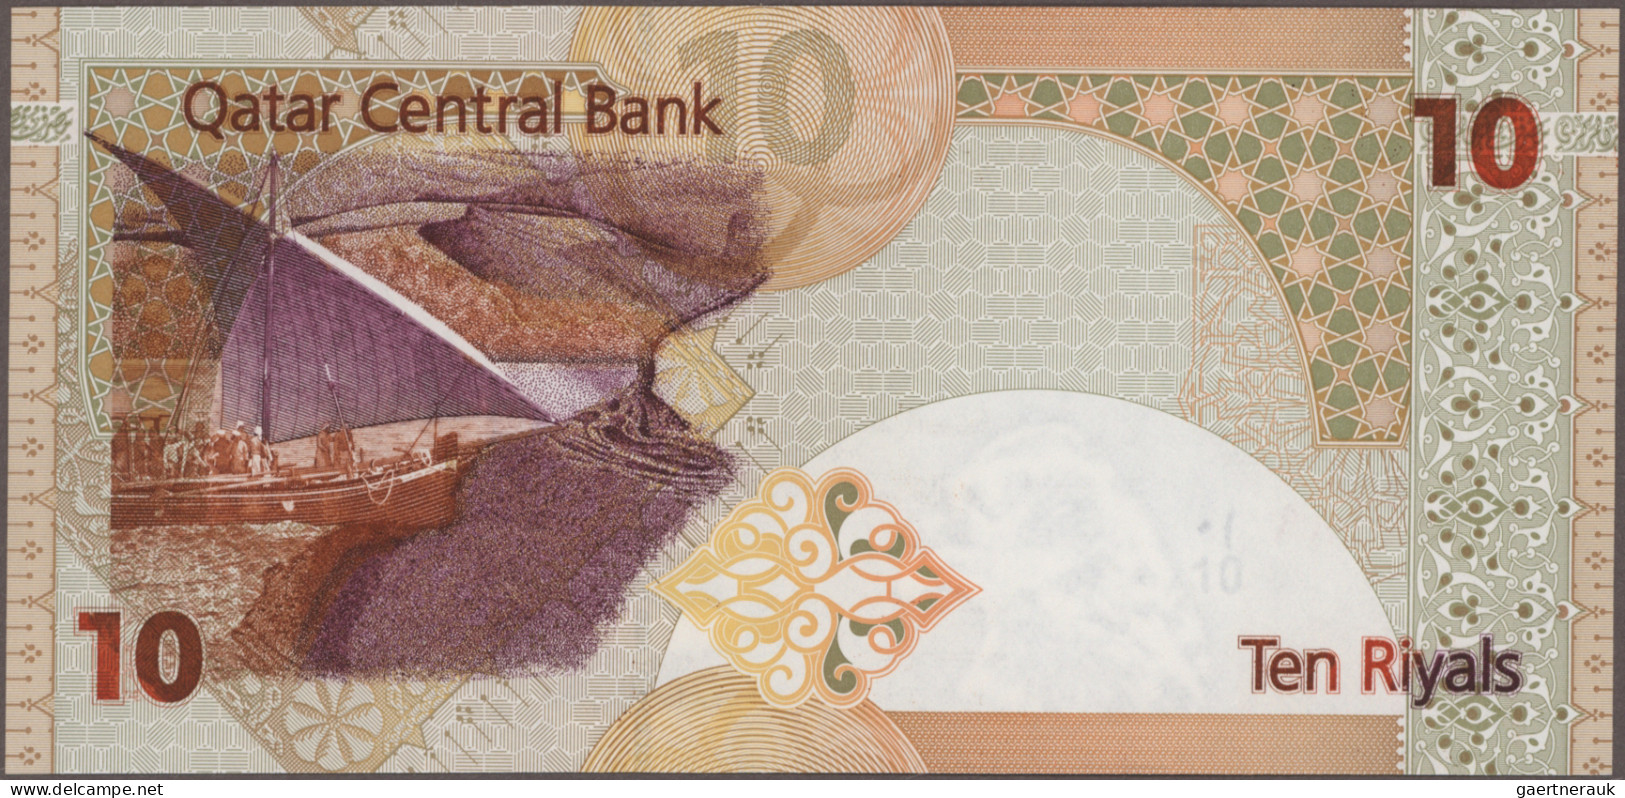 Quatar: The Qatar Monetary Agency and Qatar Central Bank, lot with 14 banknotes,